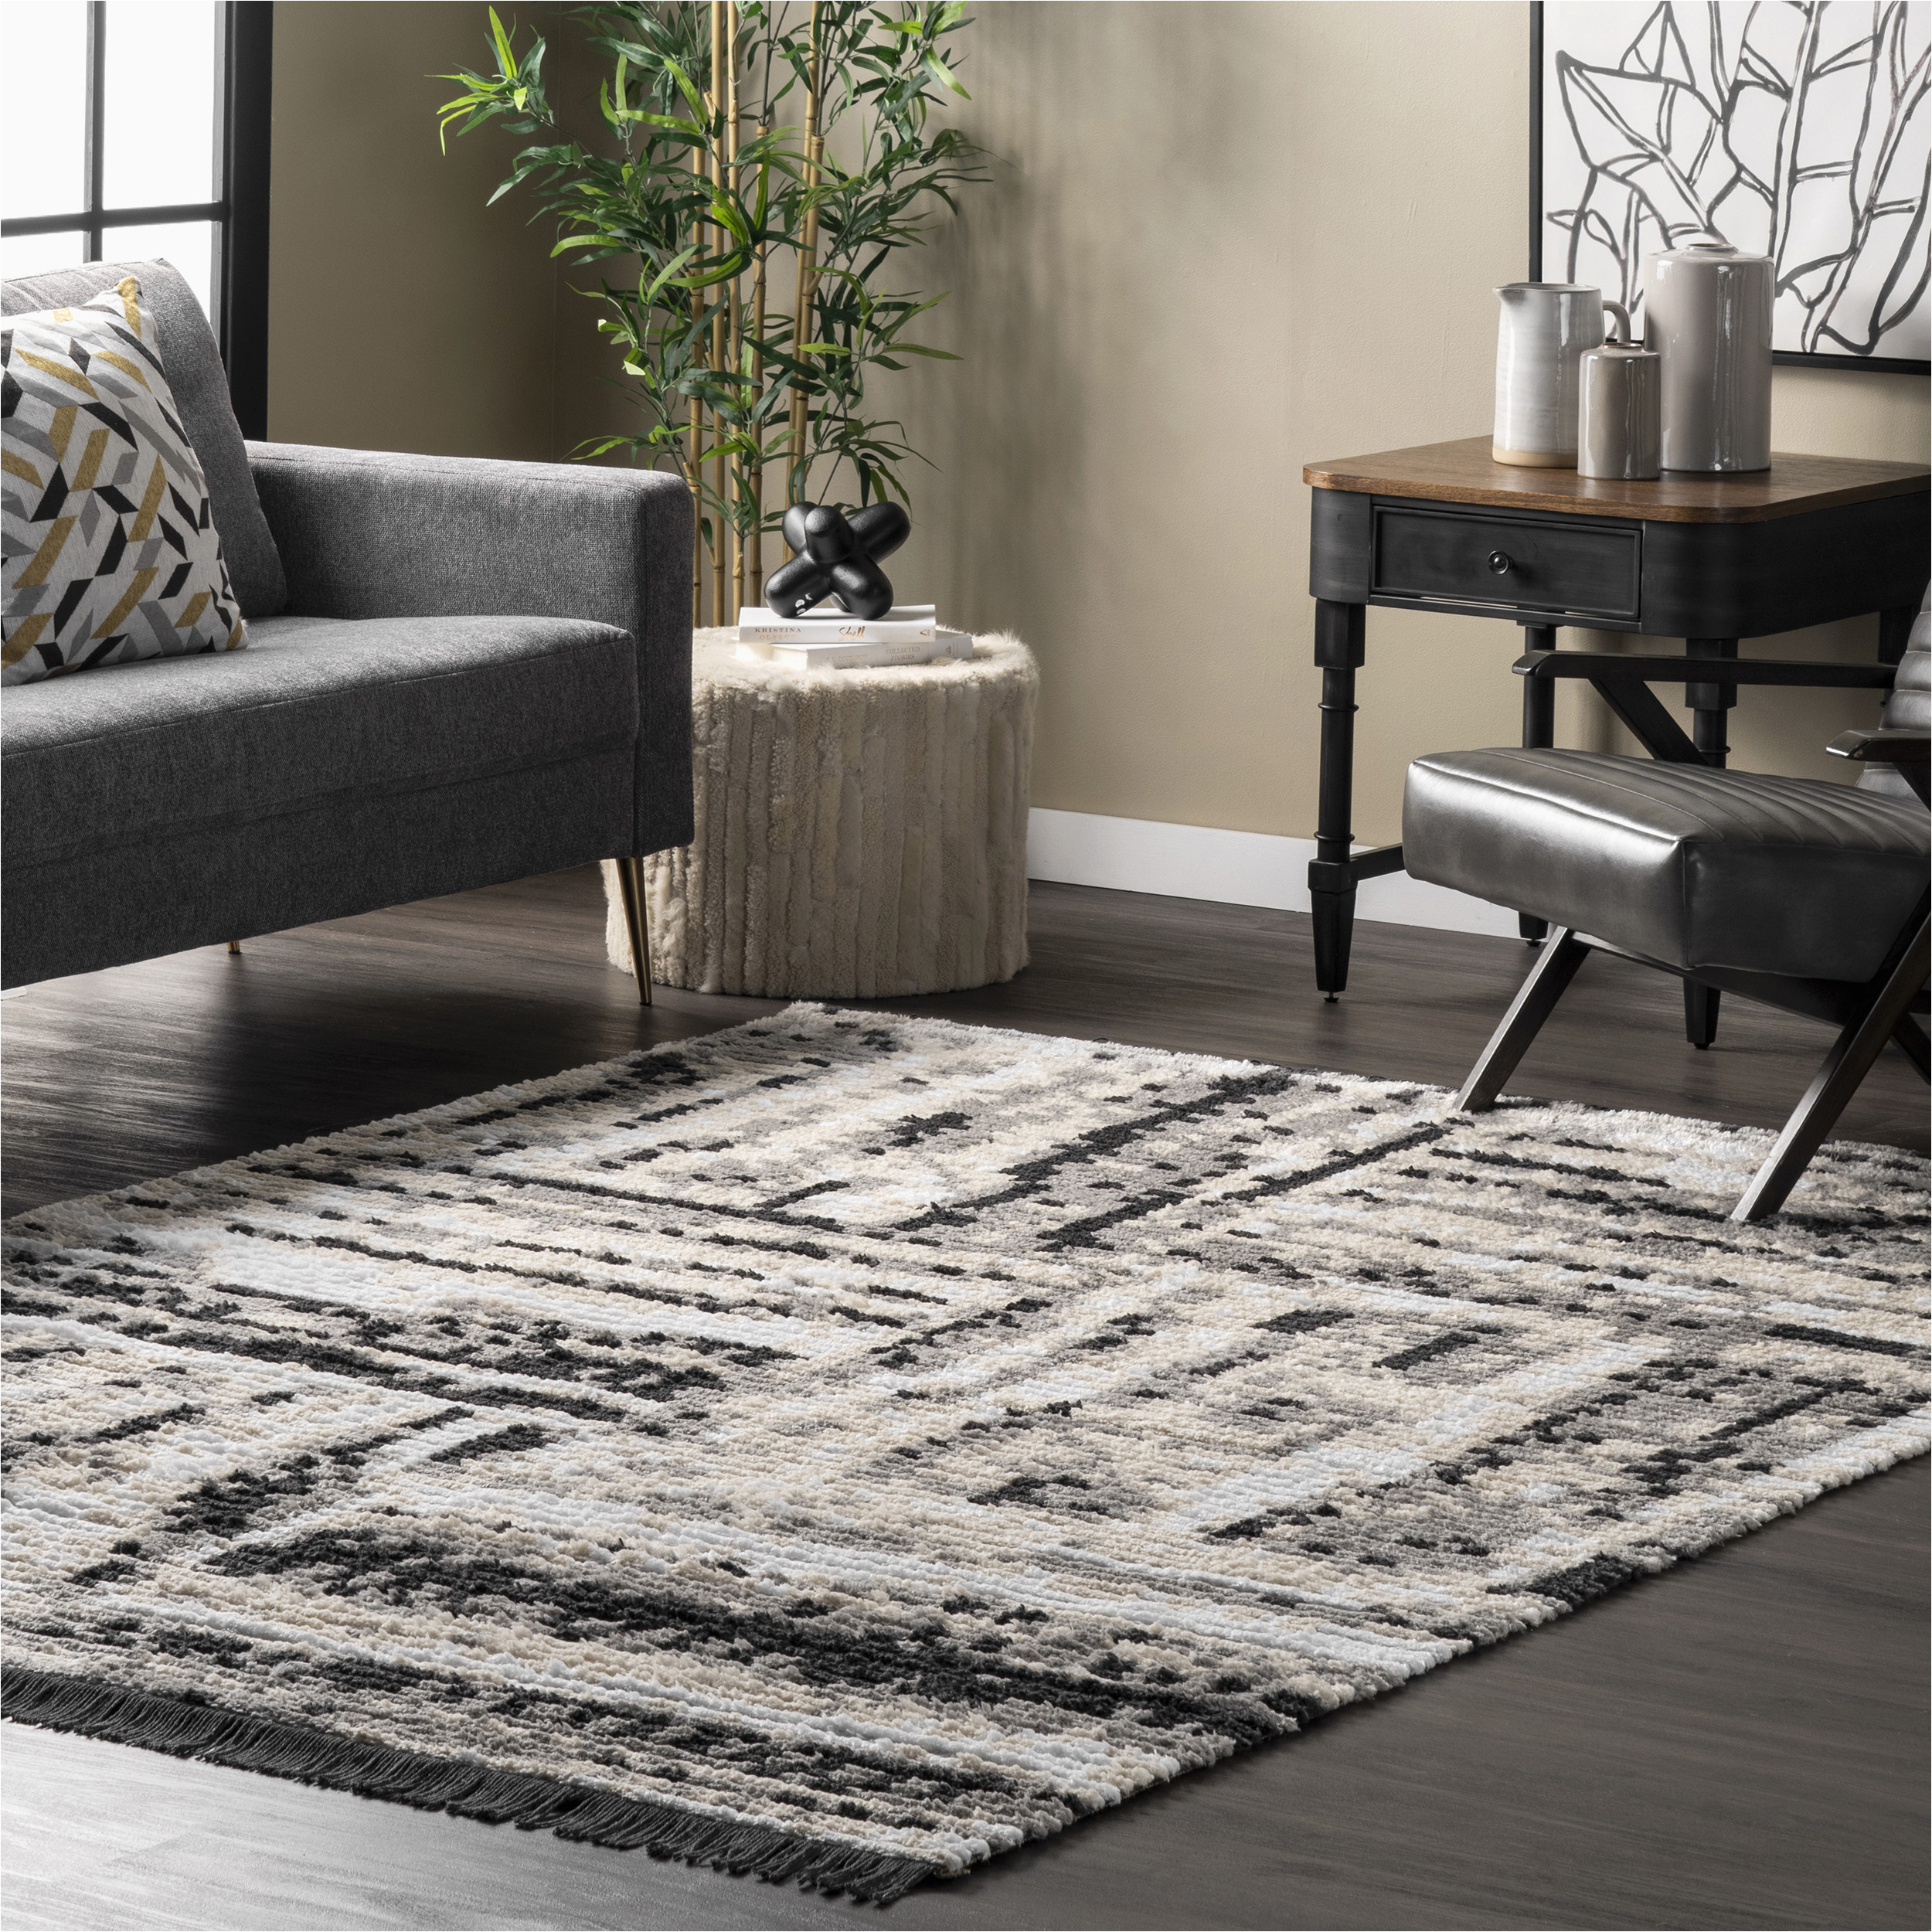 Encore Hand Carved area Rugs Stretto Multi Home & Garden Sisal/seagrass area Rugs Made In Turkey Encore Hand …